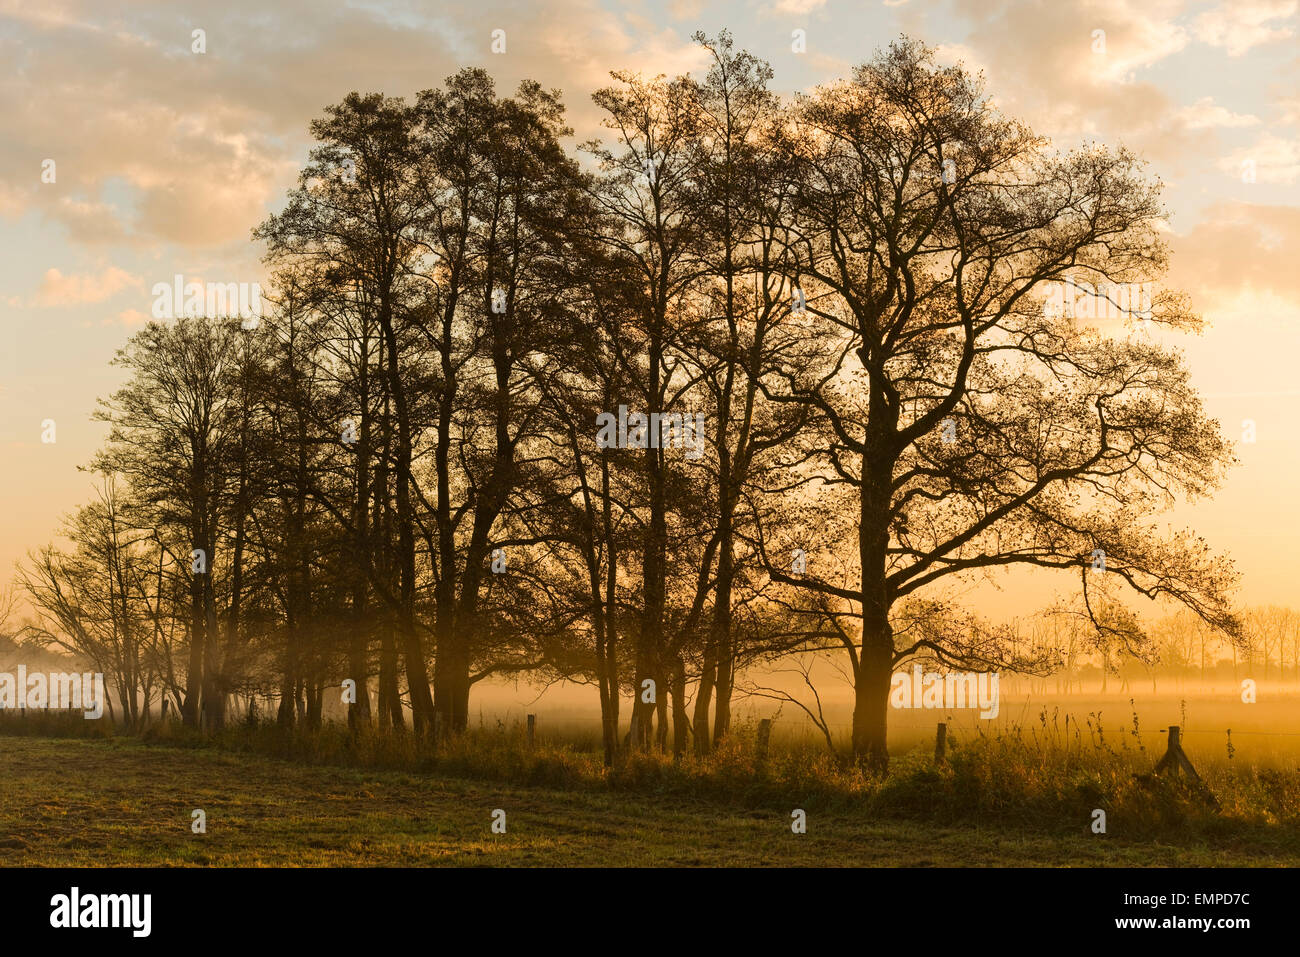 Black Alder trees (Alnus glutinosa) in the early morning, Drömling nature reserve, Lower Saxony, Germany Stock Photo